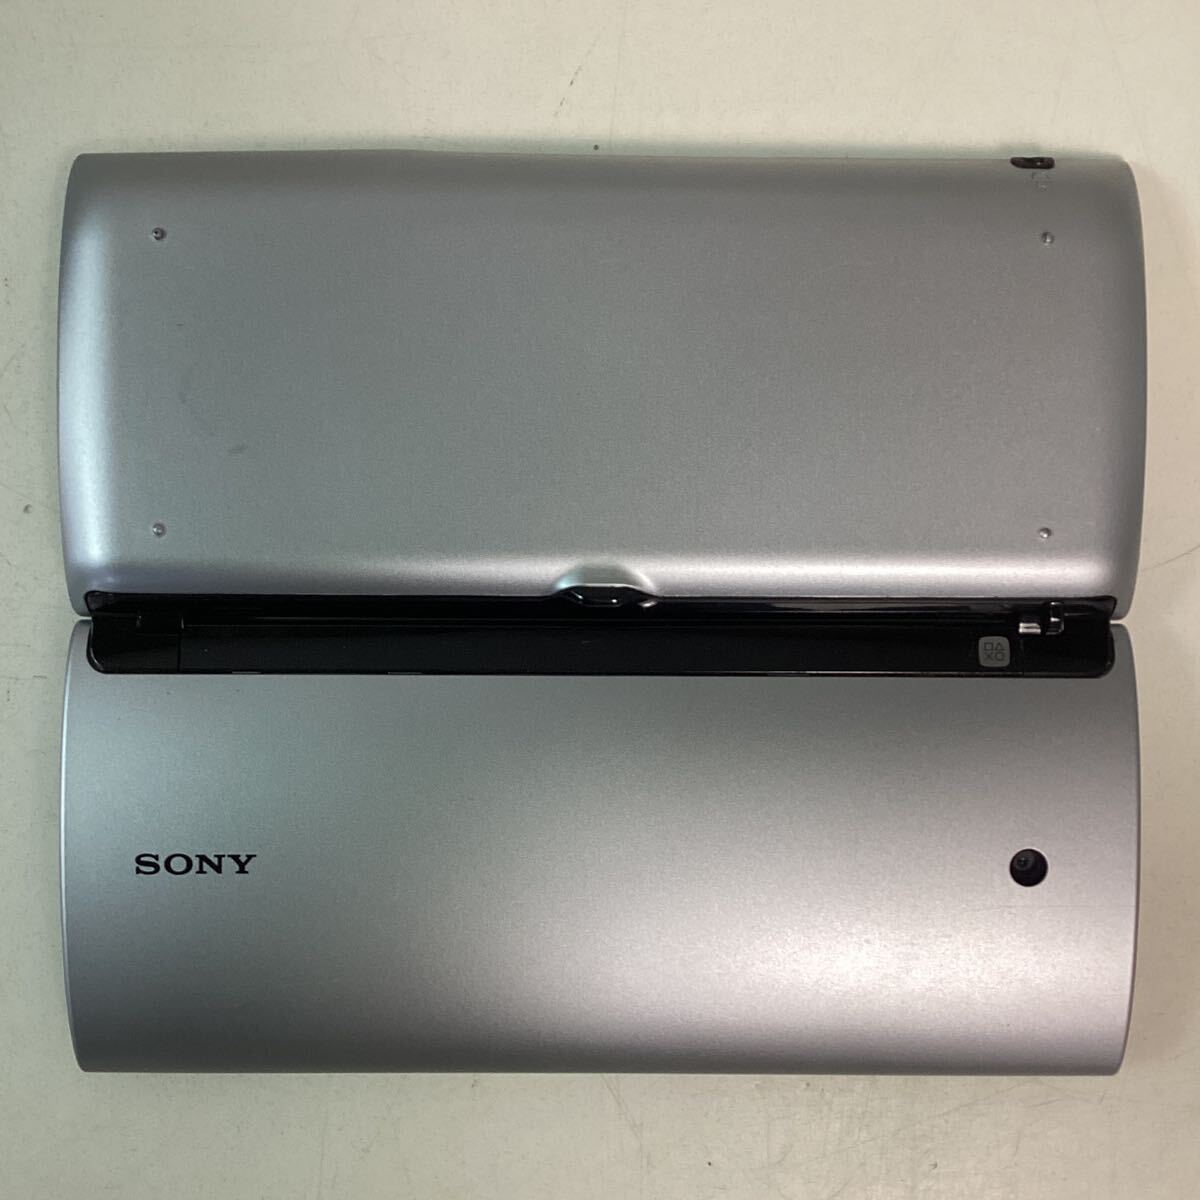 y3423 ソニー Sony Tablet Pセット シルバー SGPT211JP/S 折りたたみ 2つ折り Android タブレット 箱付き 通電確認済 中古_画像4